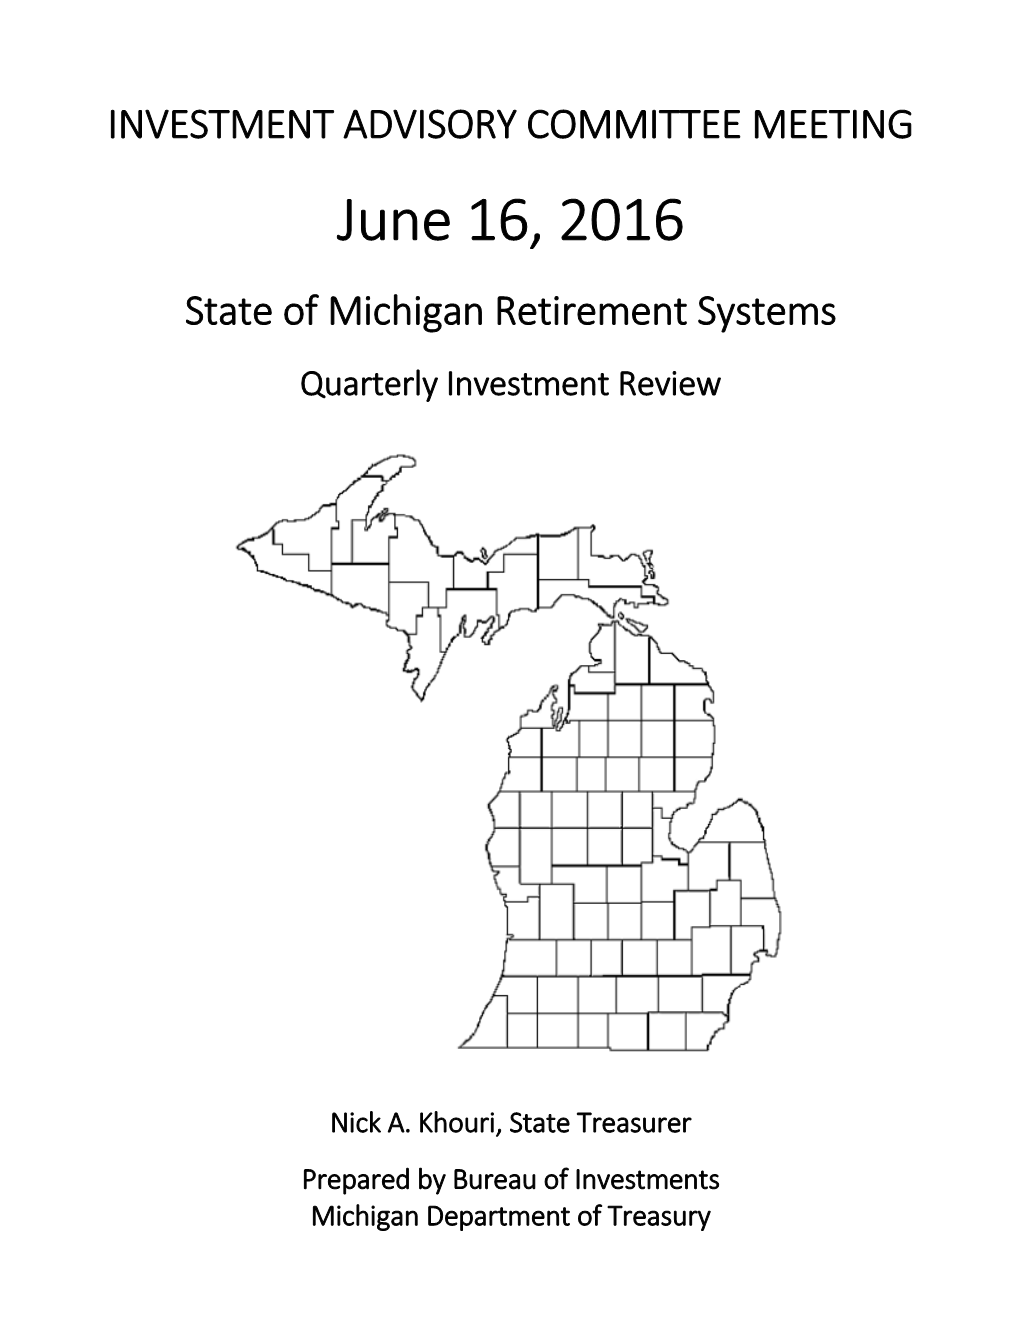 INVESTMENT ADVISORY COMMITTEE MEETING June 16, 2016 State of Michigan Retirement Systems Quarterly Investment Review